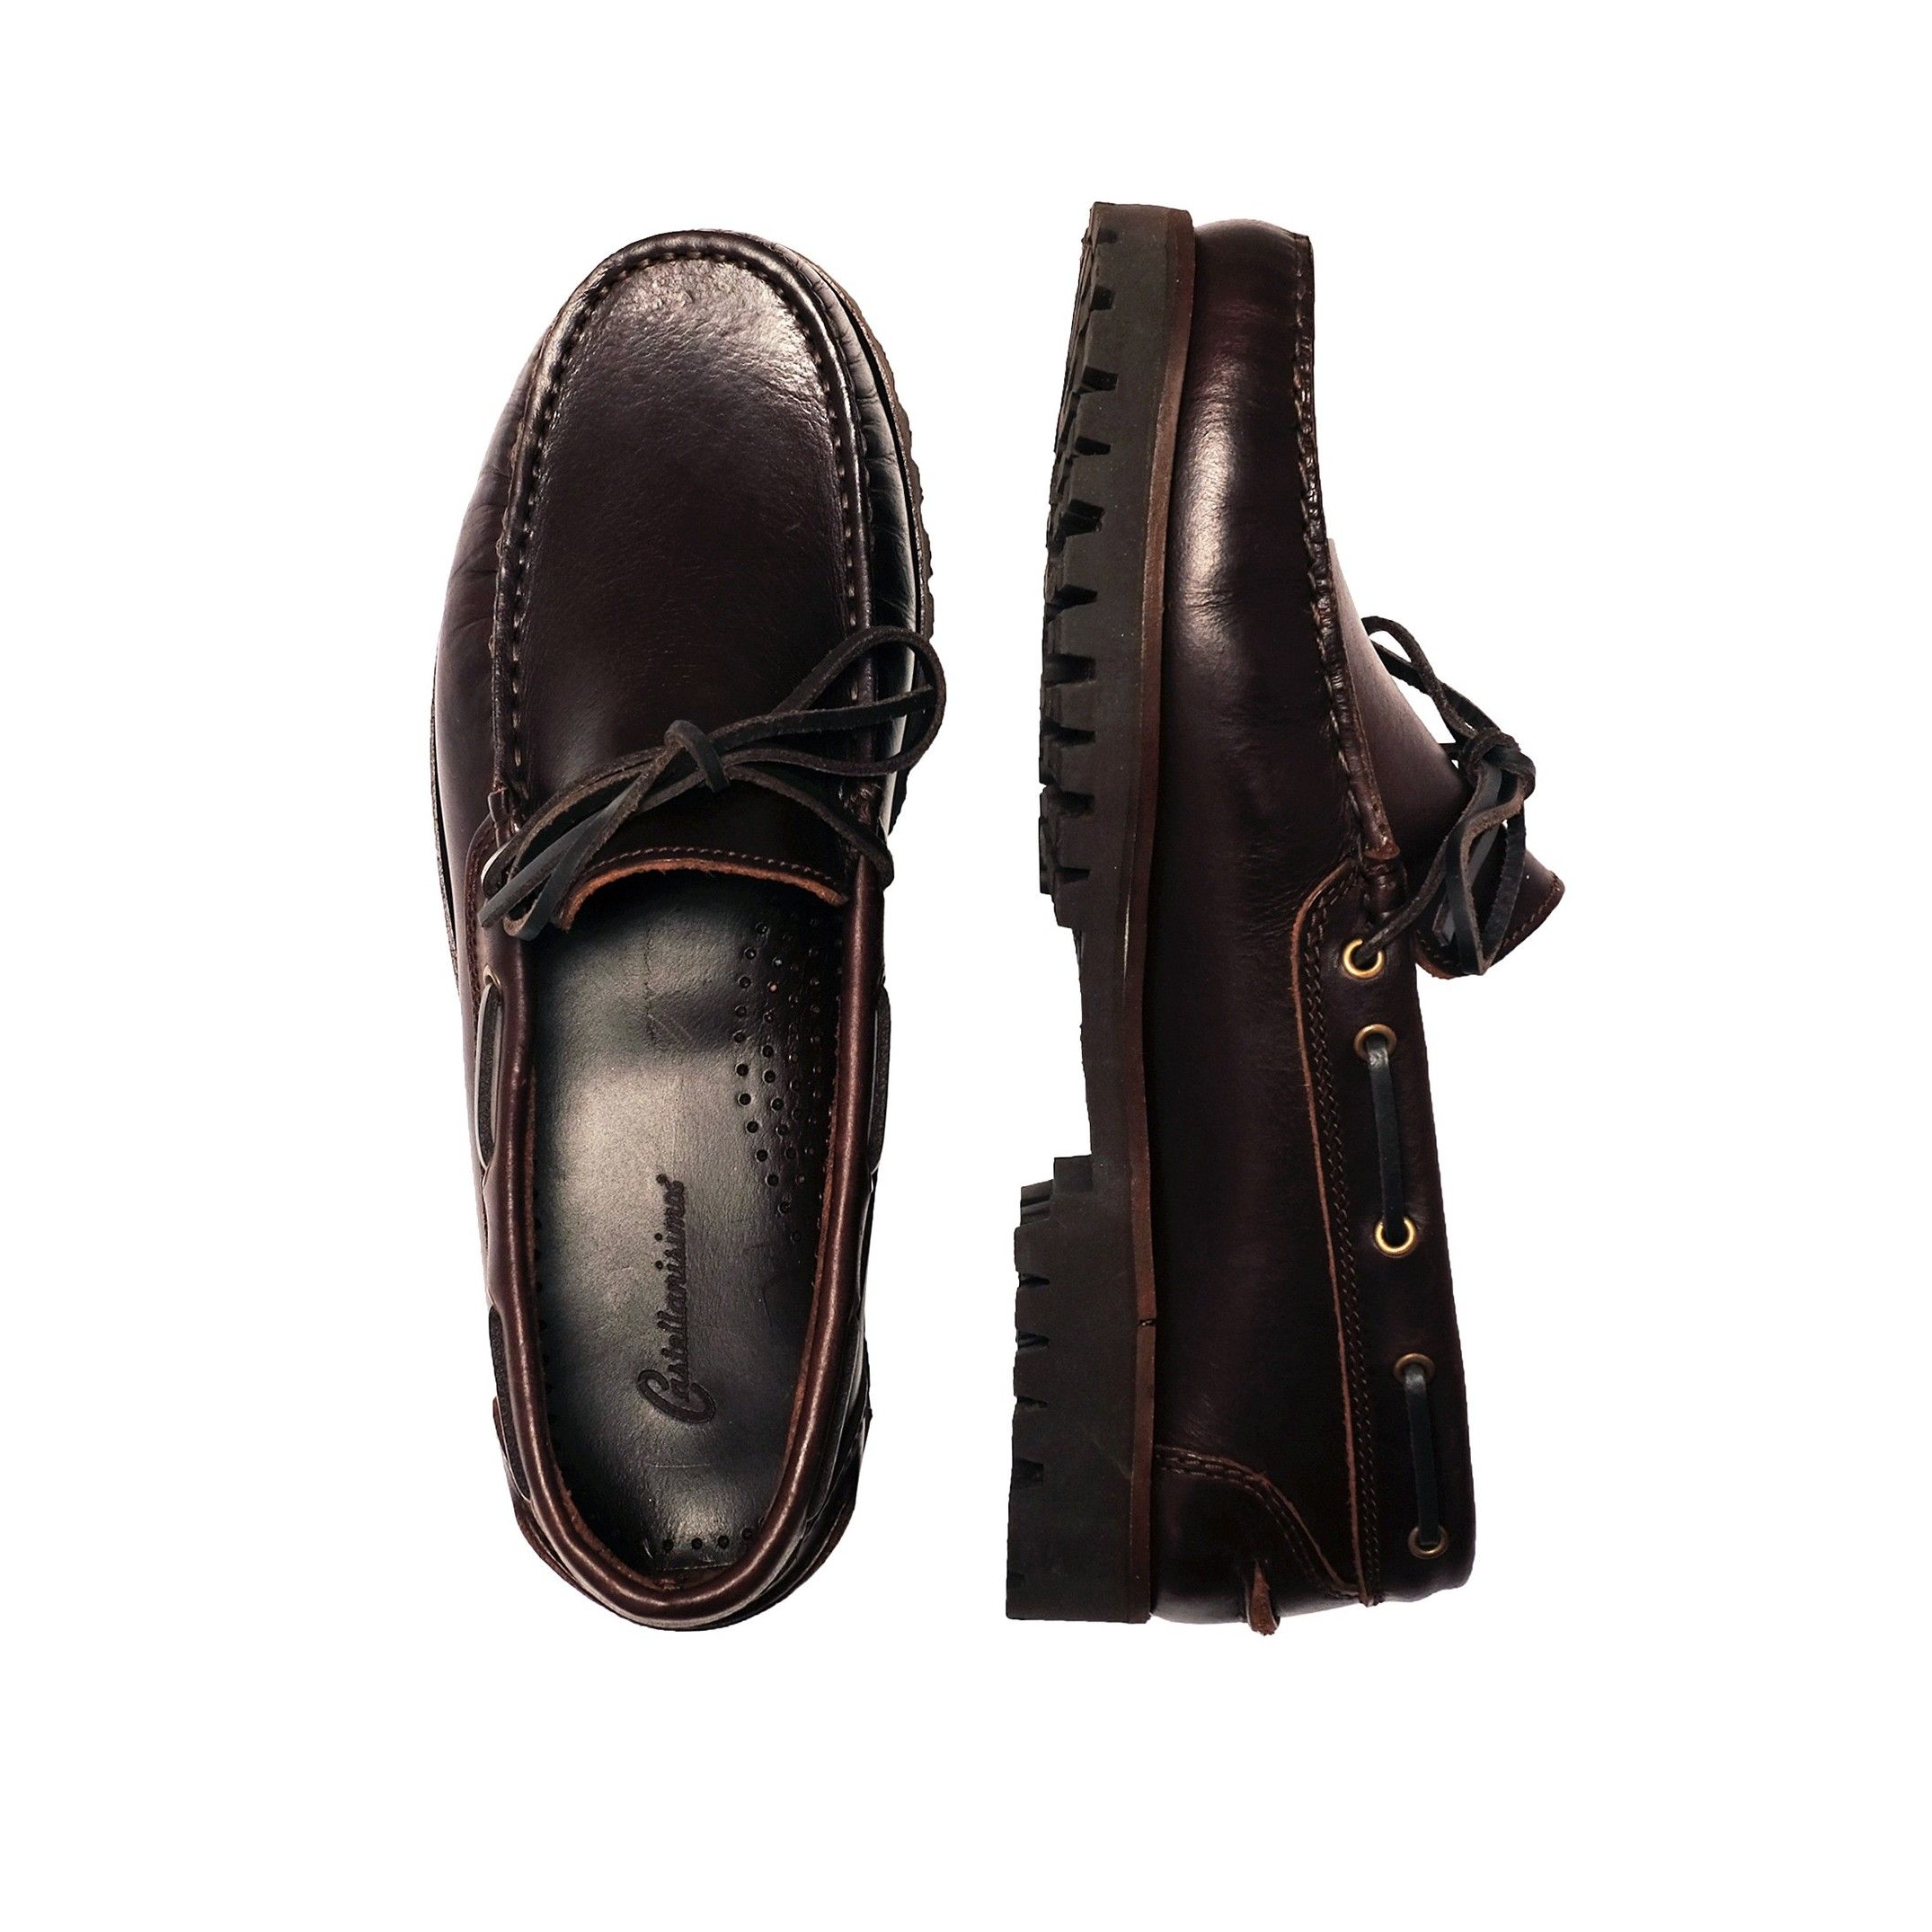 Boat shoes for men with laces closure. Upper and inner made of leather. Rubber sole. Made in Spain.